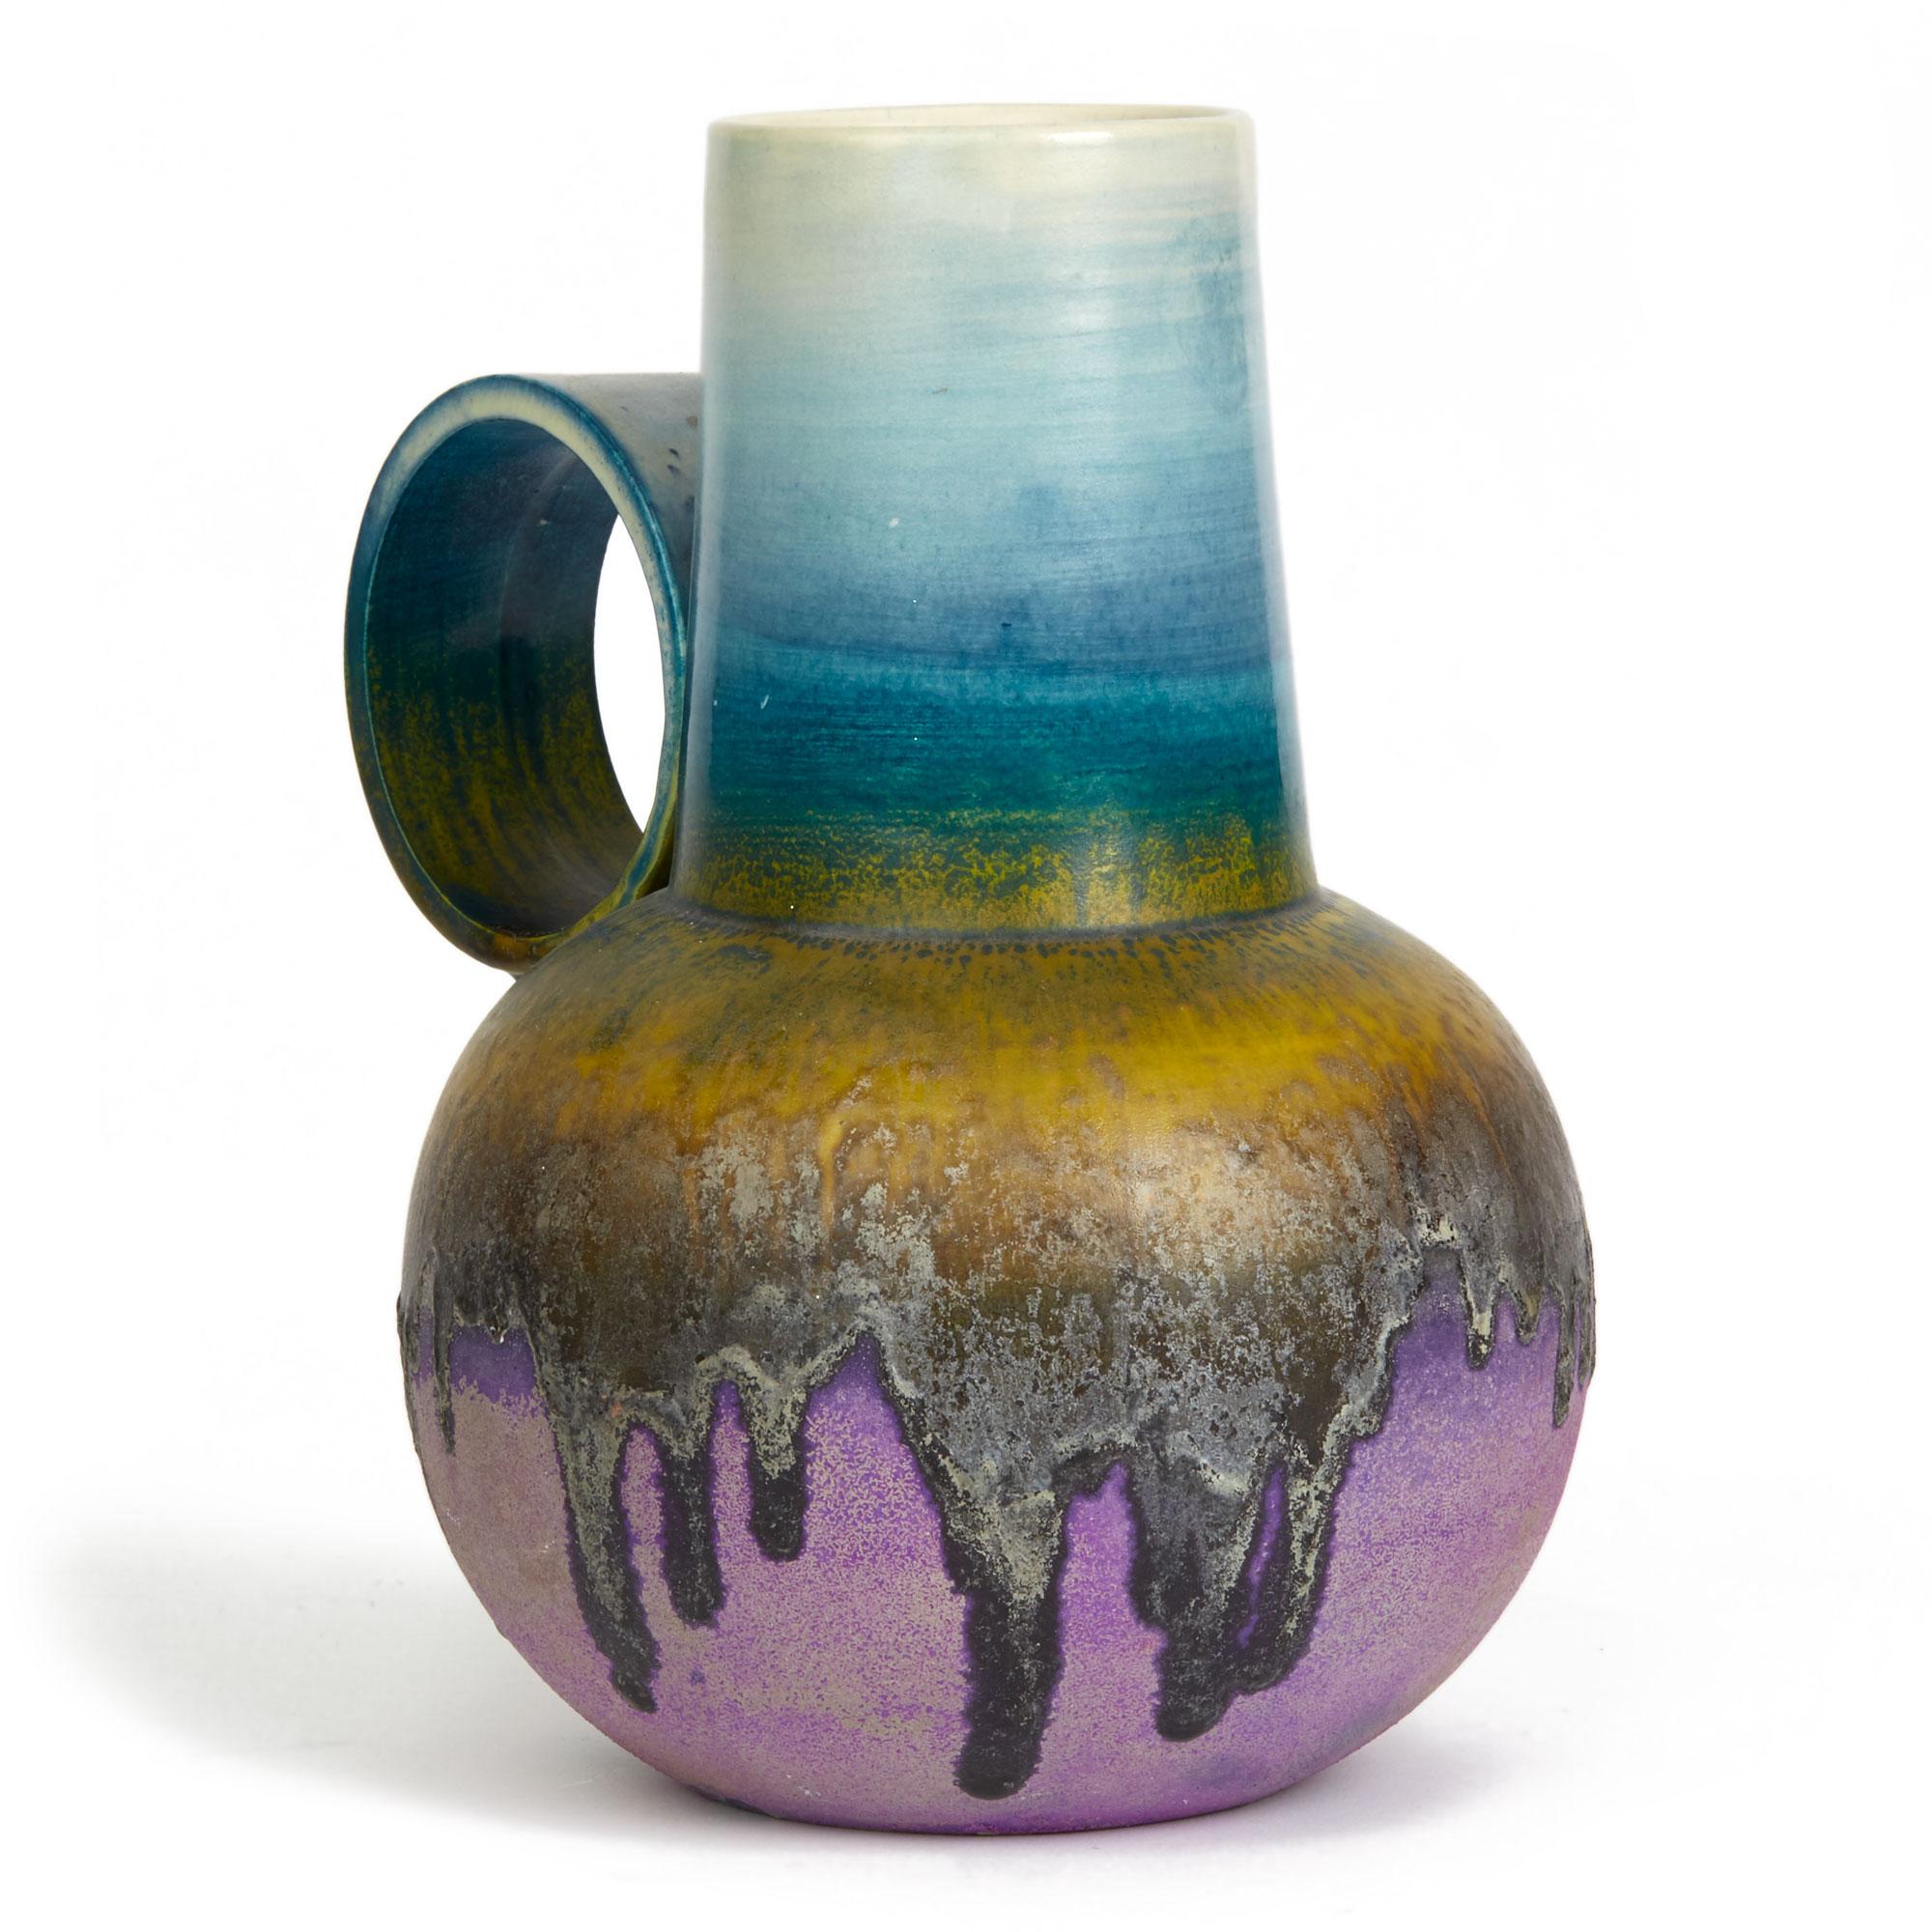 PLEASE NOTE: This piece is currently located in our Amsterdam office, please enquire for delivery times. 

A very stylish and unusual glazed ceramic handled vase by renowned Italian artist Marcello Fantoni (1915-2011). The rounded bottle shaped vase